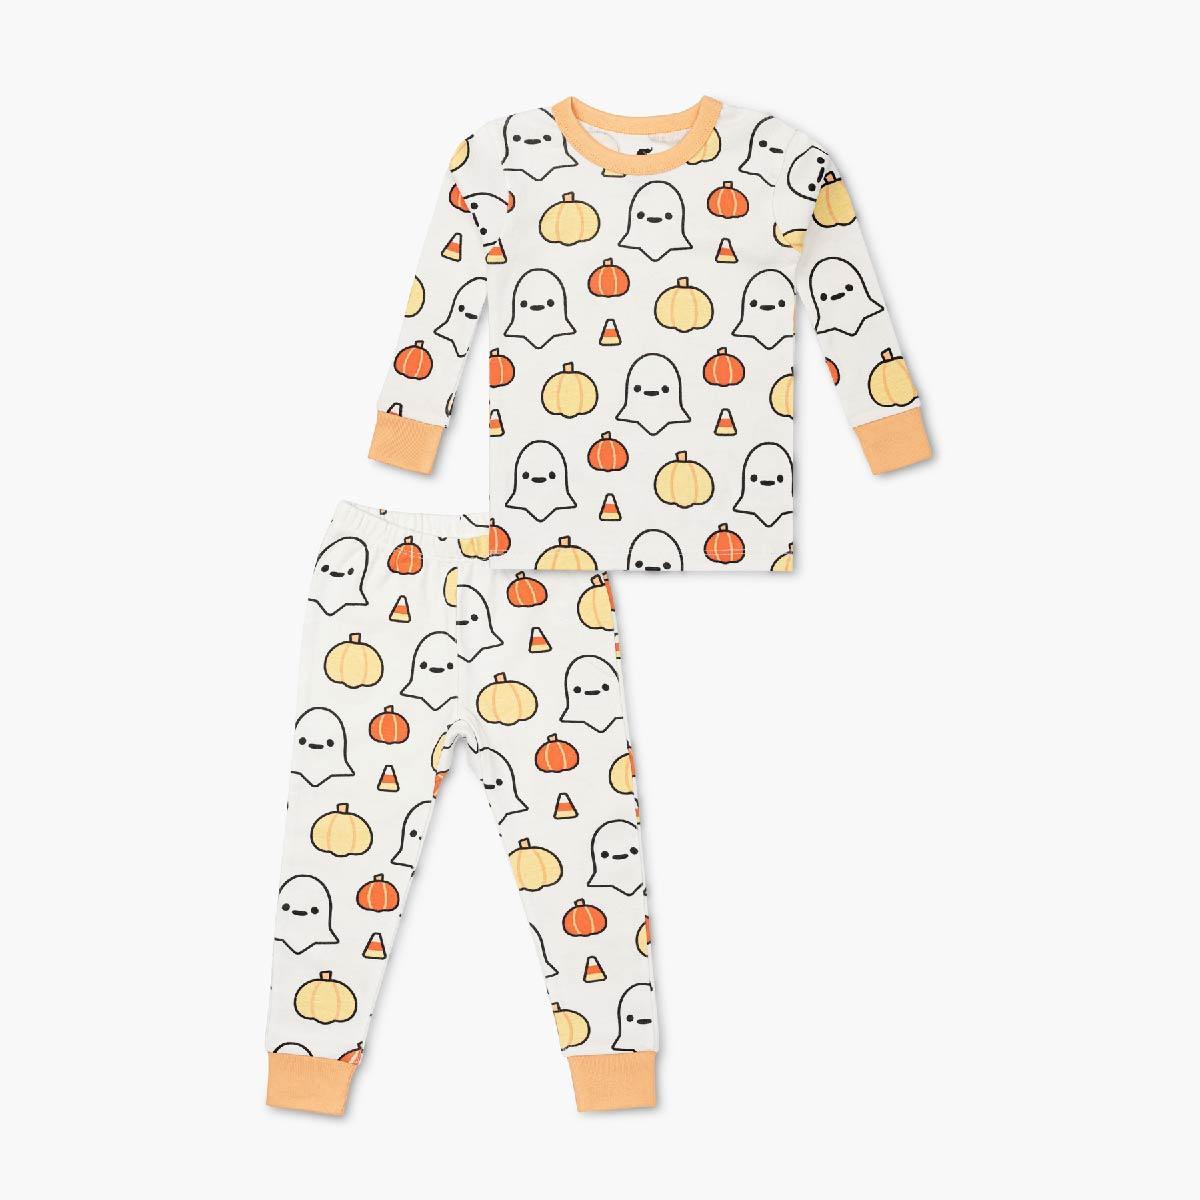 Monica + Andy Matching Family Two-Piece Pajama Set Happy Halloween Product Image